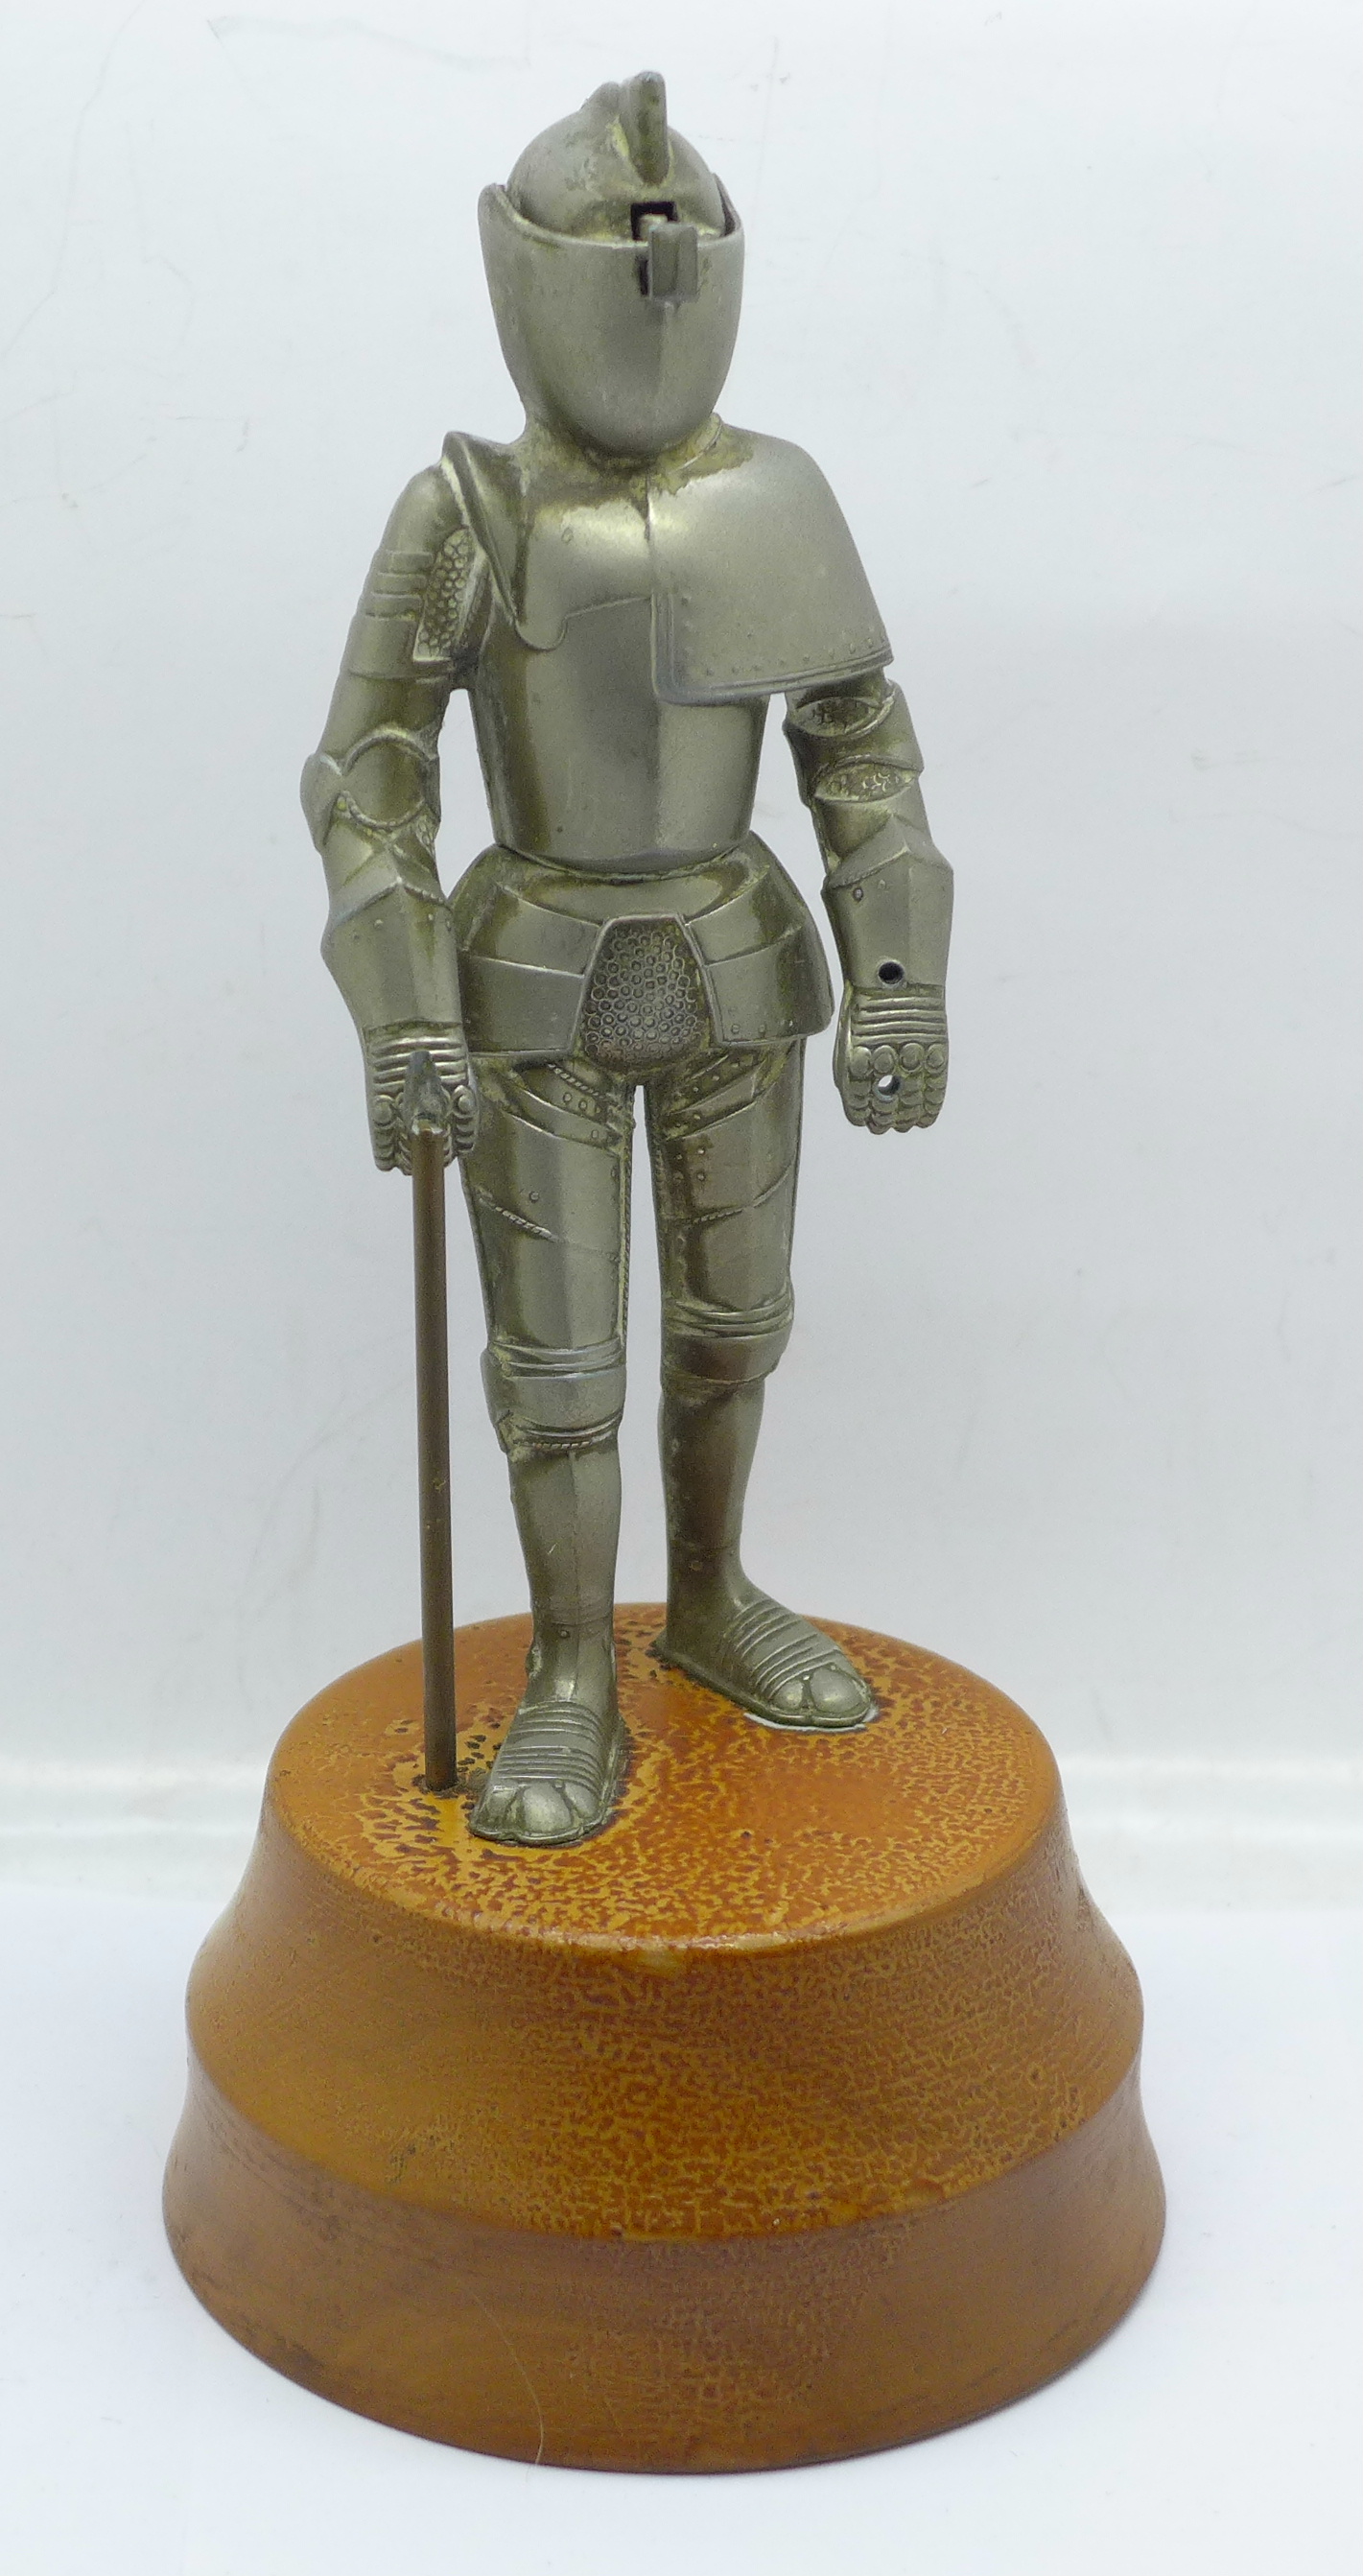 A metal Knight table lighter on a wooden base